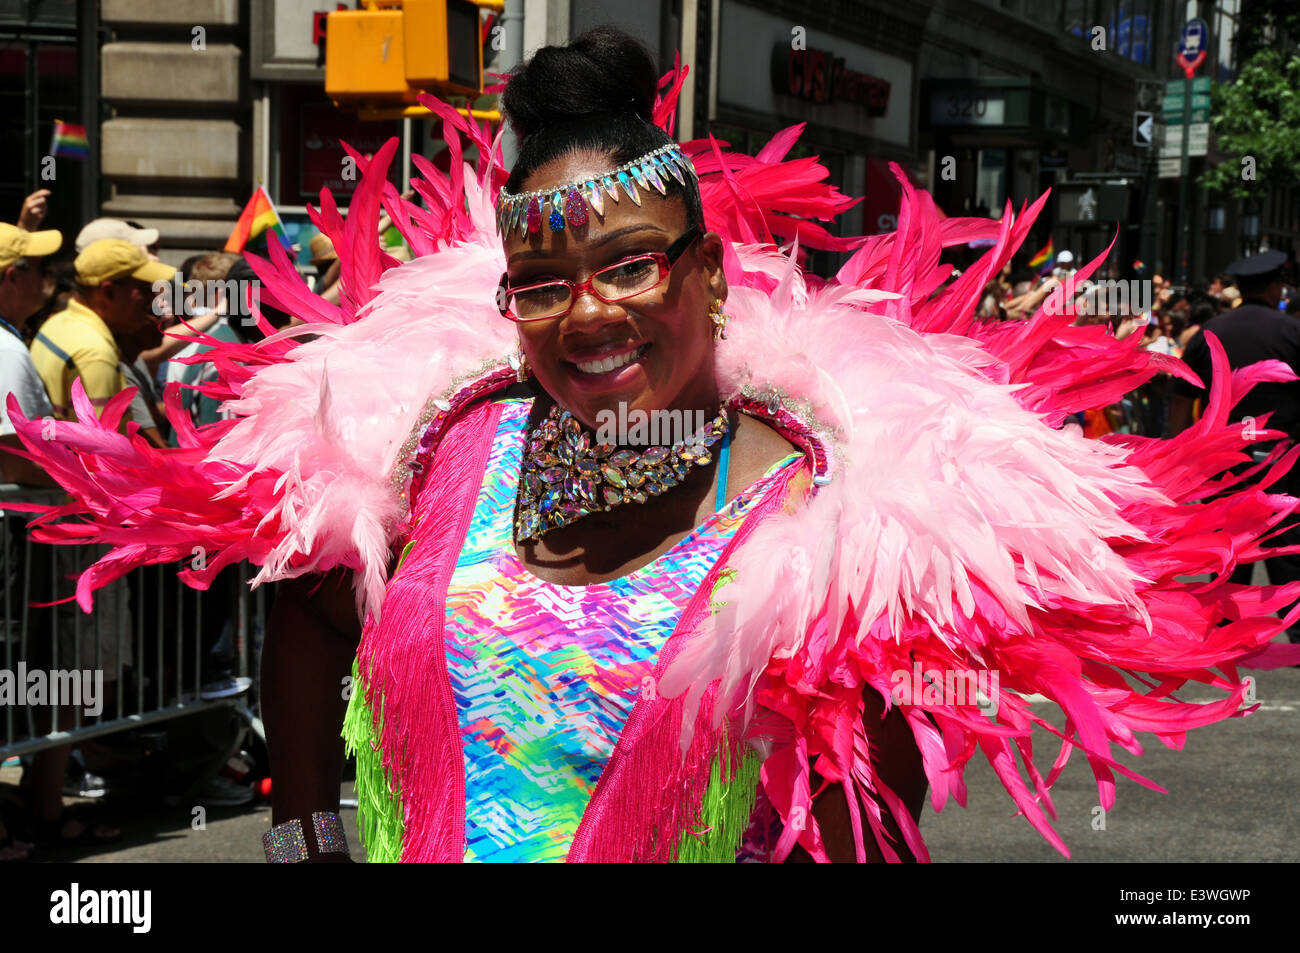 NYC: Woman with spectacular pink feather boa wrap at the 2014 Gay Pride Parade on Fifth Avenue Stock Photo